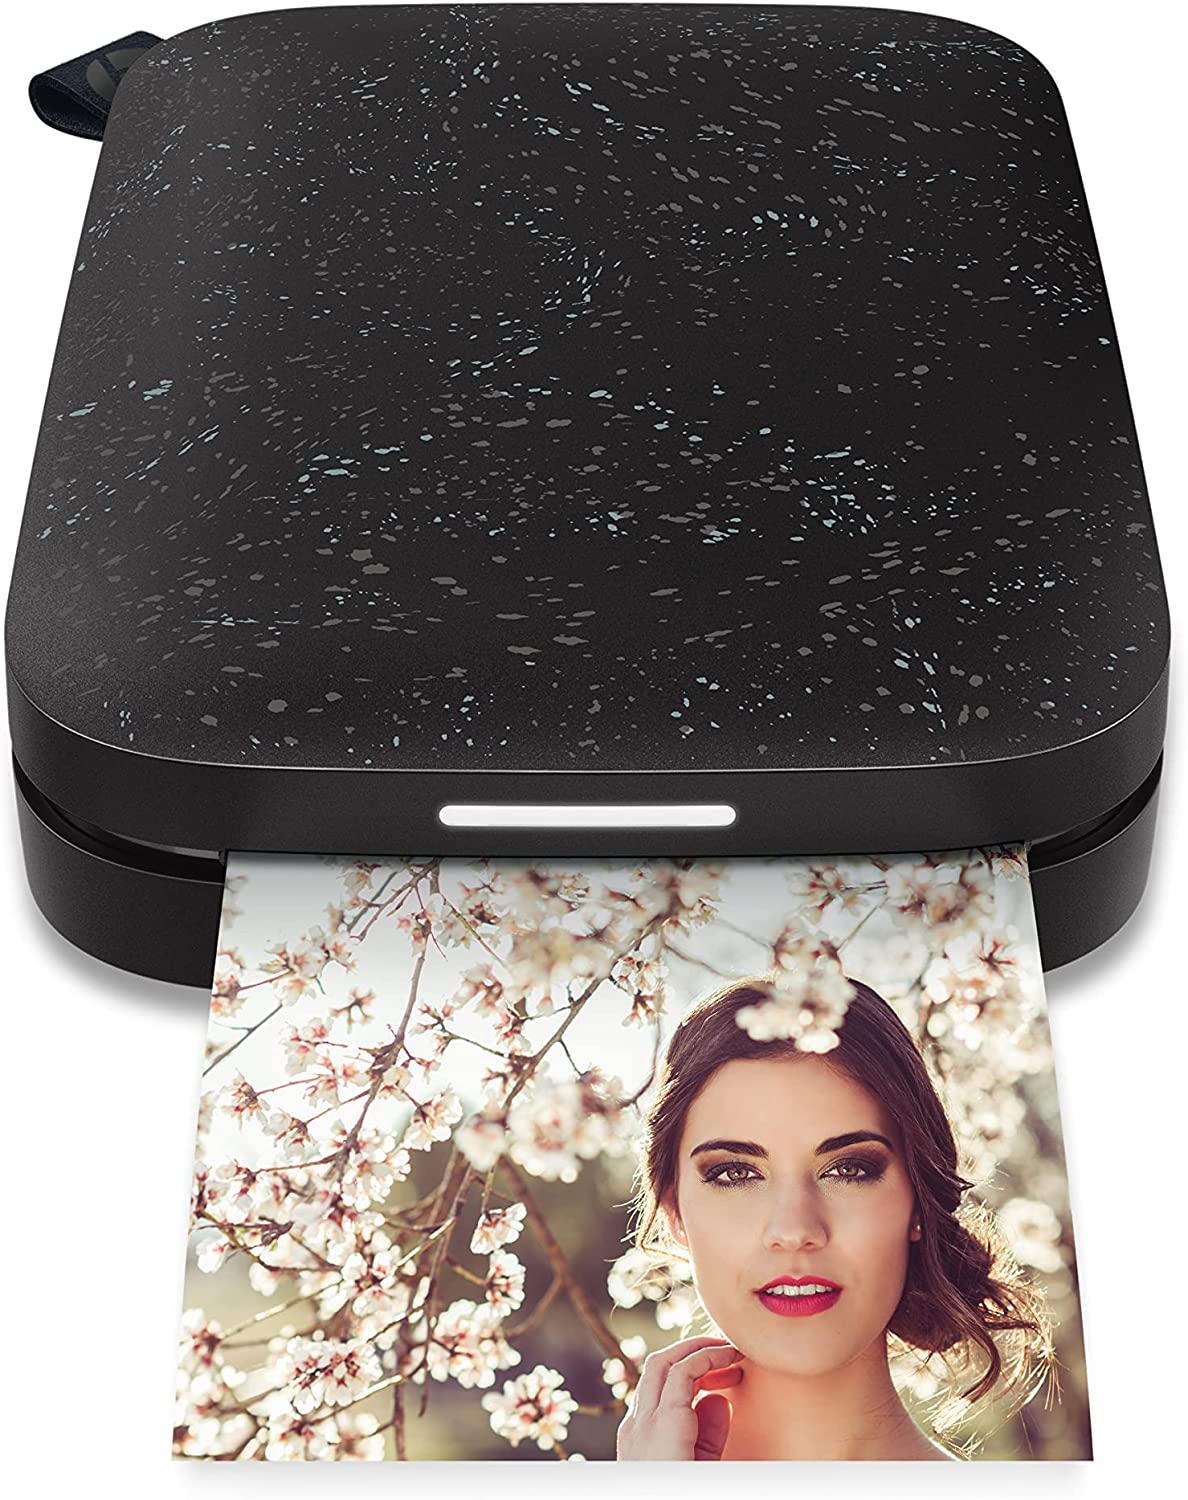 HP Sprocket Portable Printer, Zink Sticky Paper 2x3" Instant Photo Printer & Android | Michaels